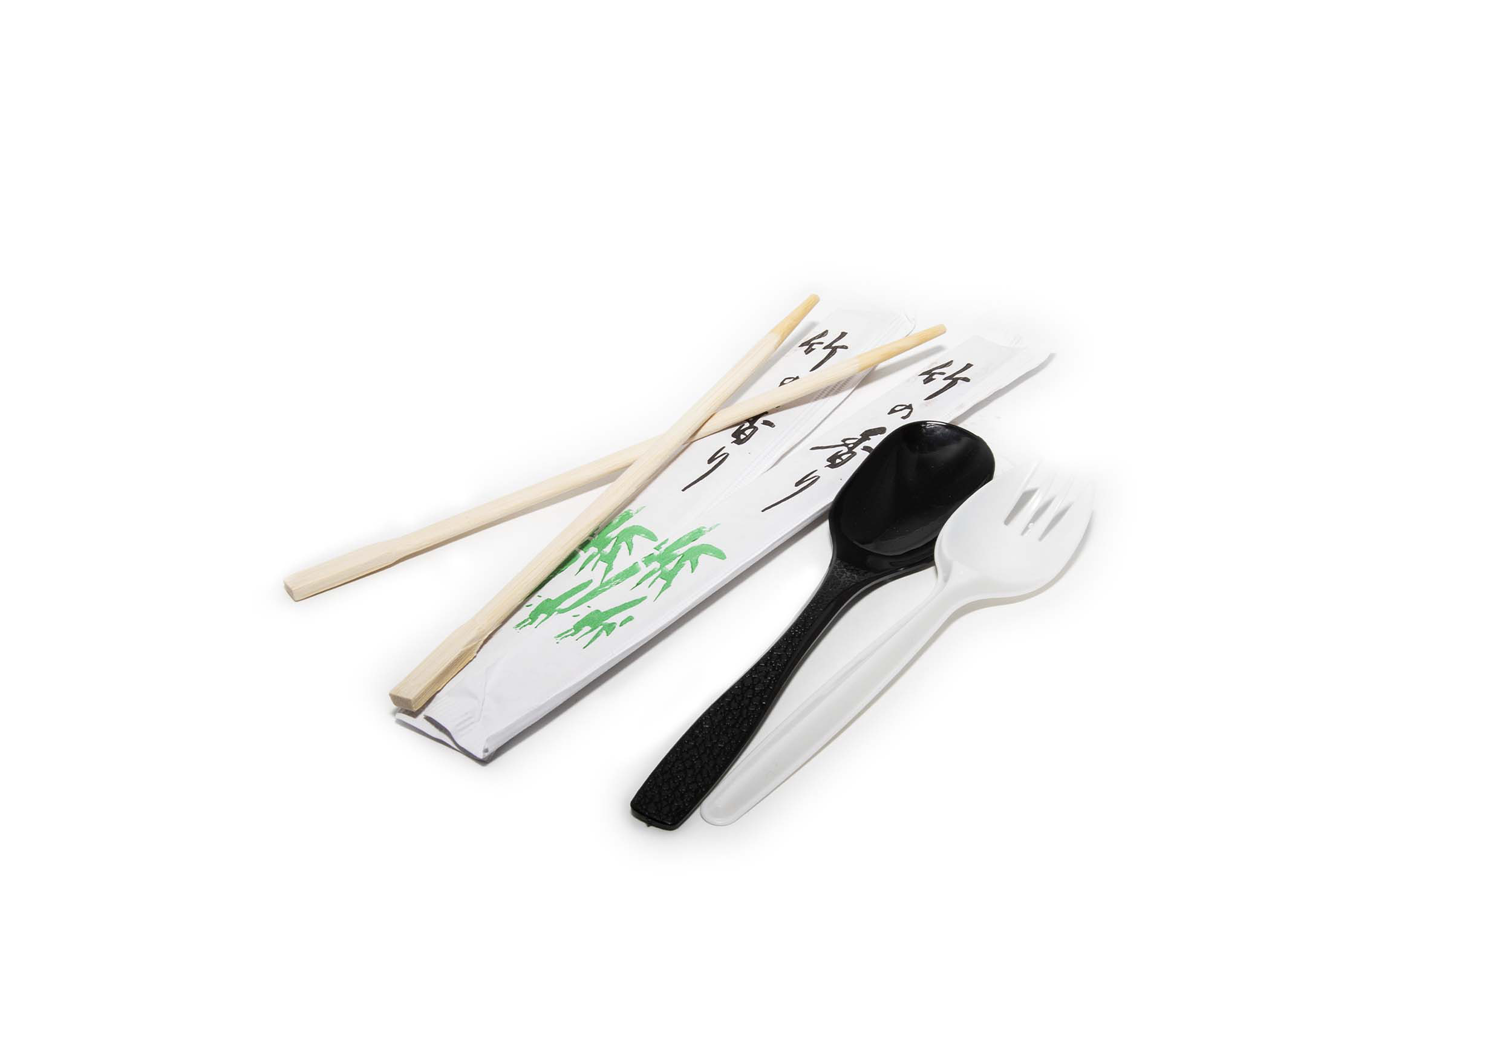 Colour photograph depicting a disposable spoon, fork and bamboo chopsticks.